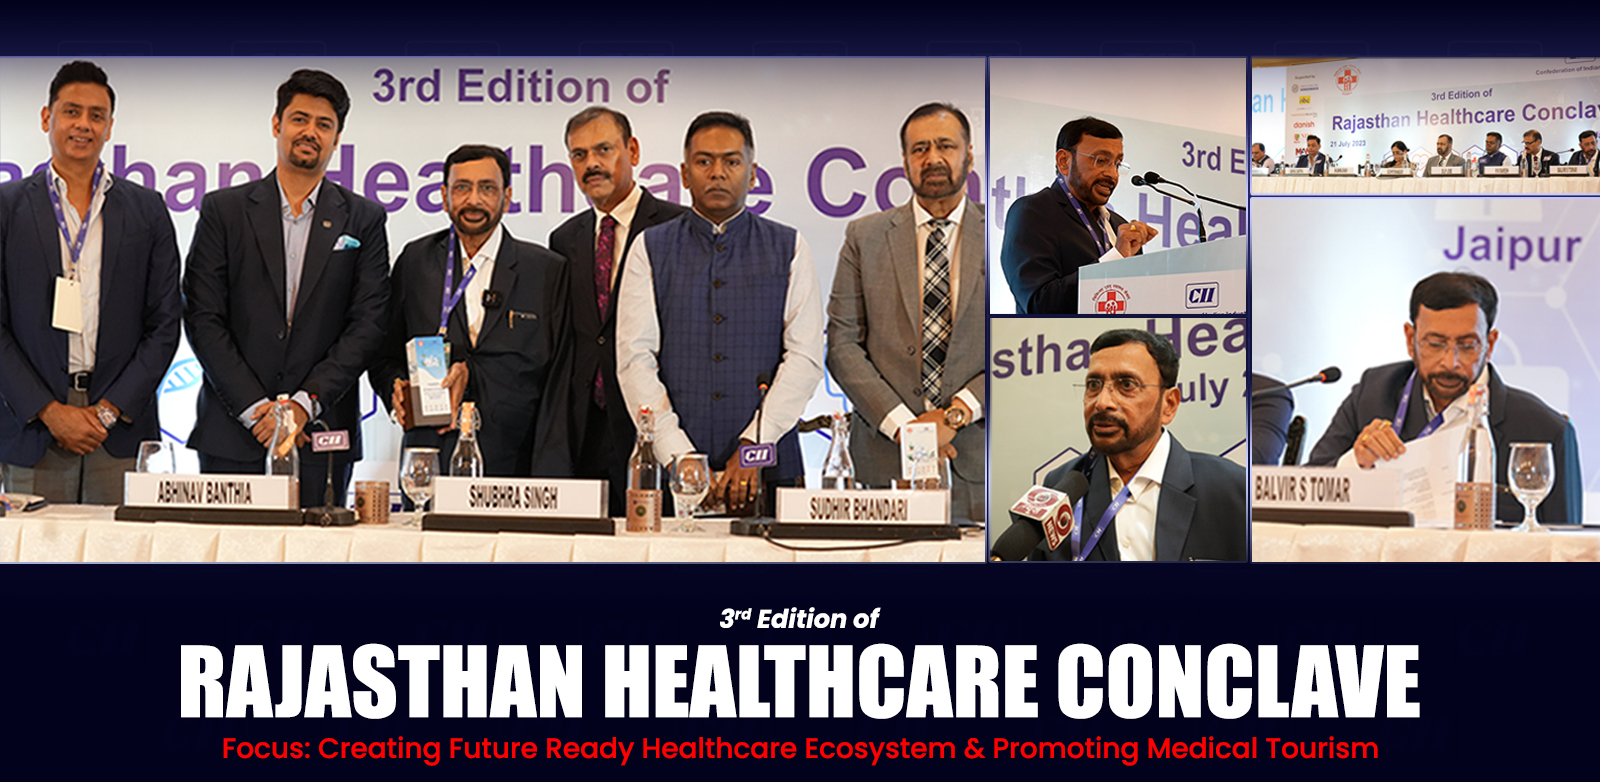 Rajasthan Healthcare Conclave